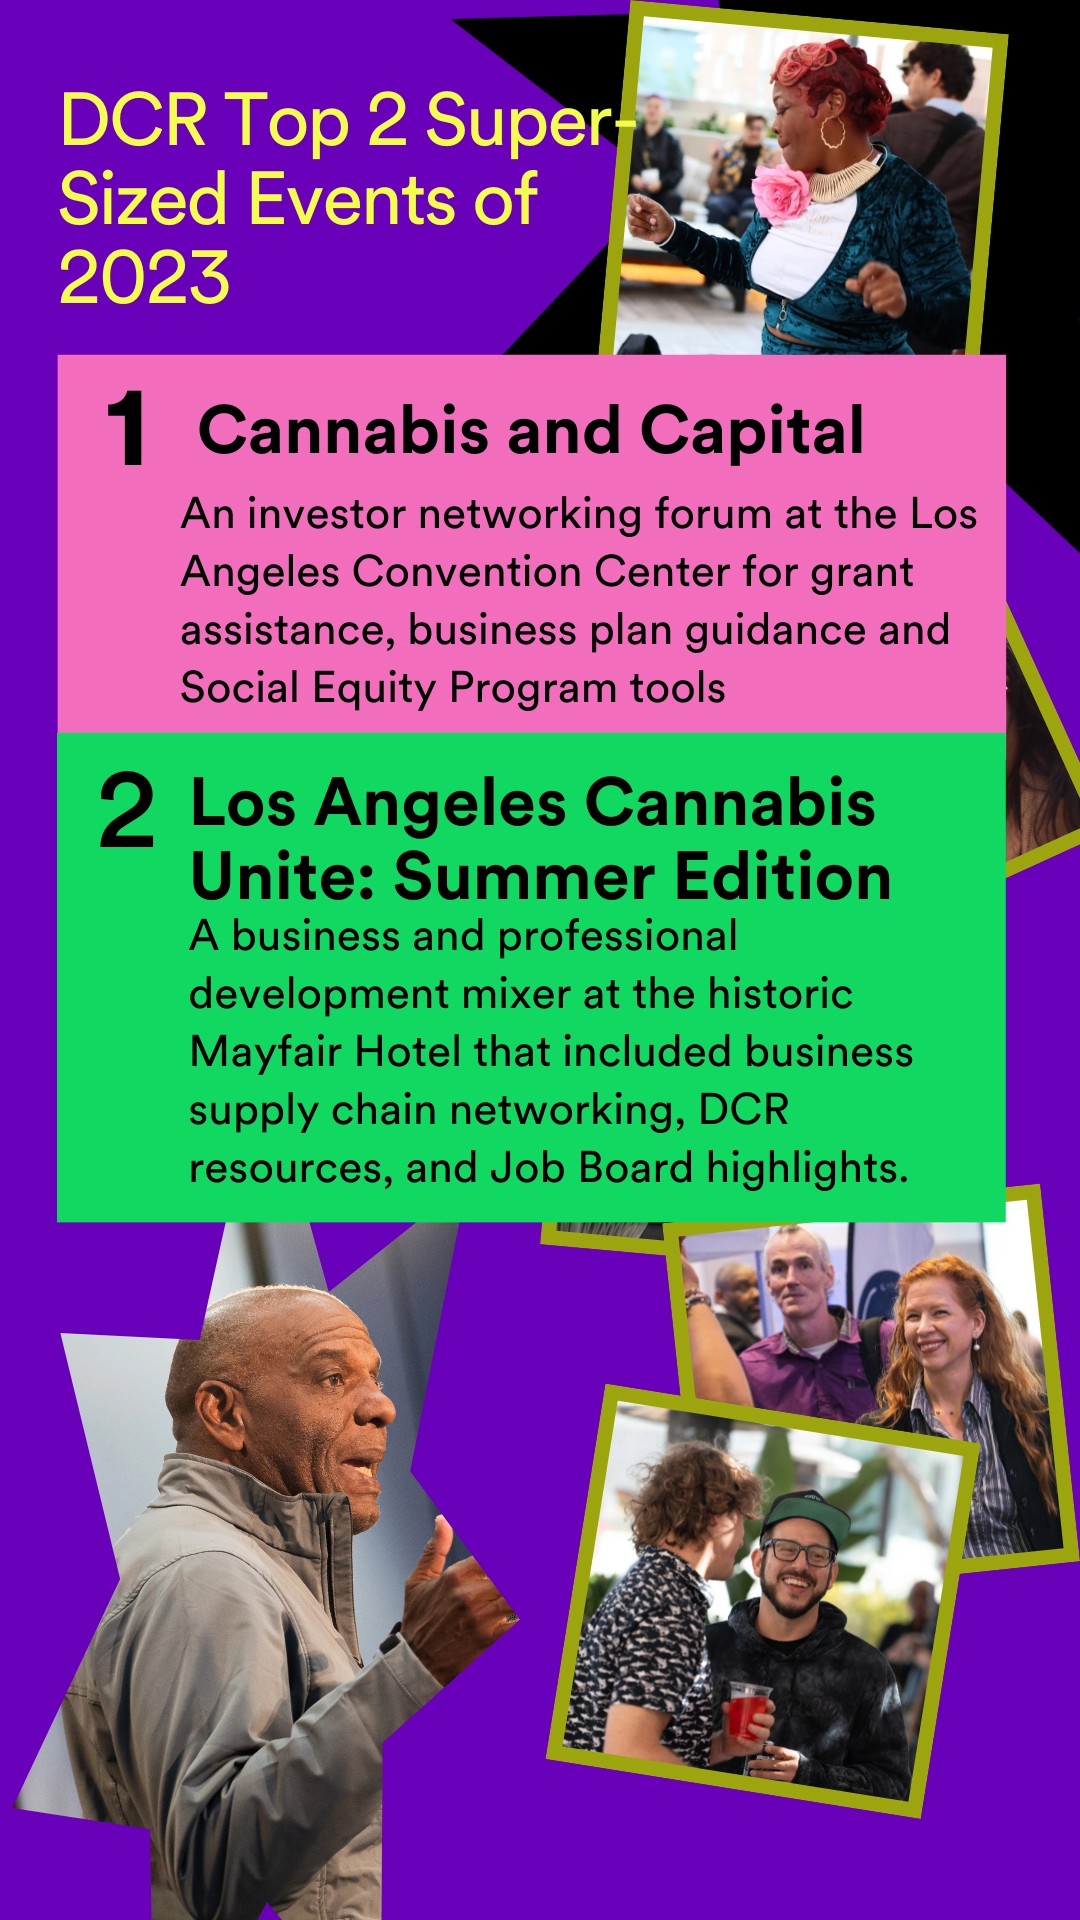 DCR Top 2 Super-sized Events of 2023. 1. Cannabis and Capital. An investor networking forum at the Los Angeles Convention Center for grans assistance, business plan guidance and Social Equity Program tools. 2. Los Angeles Cannabis unite: Summer Edition. A business and professional development mixer at the historifc Mayfair Hotel that included business supply chain networking, DCR resources, and Job Board highlights.